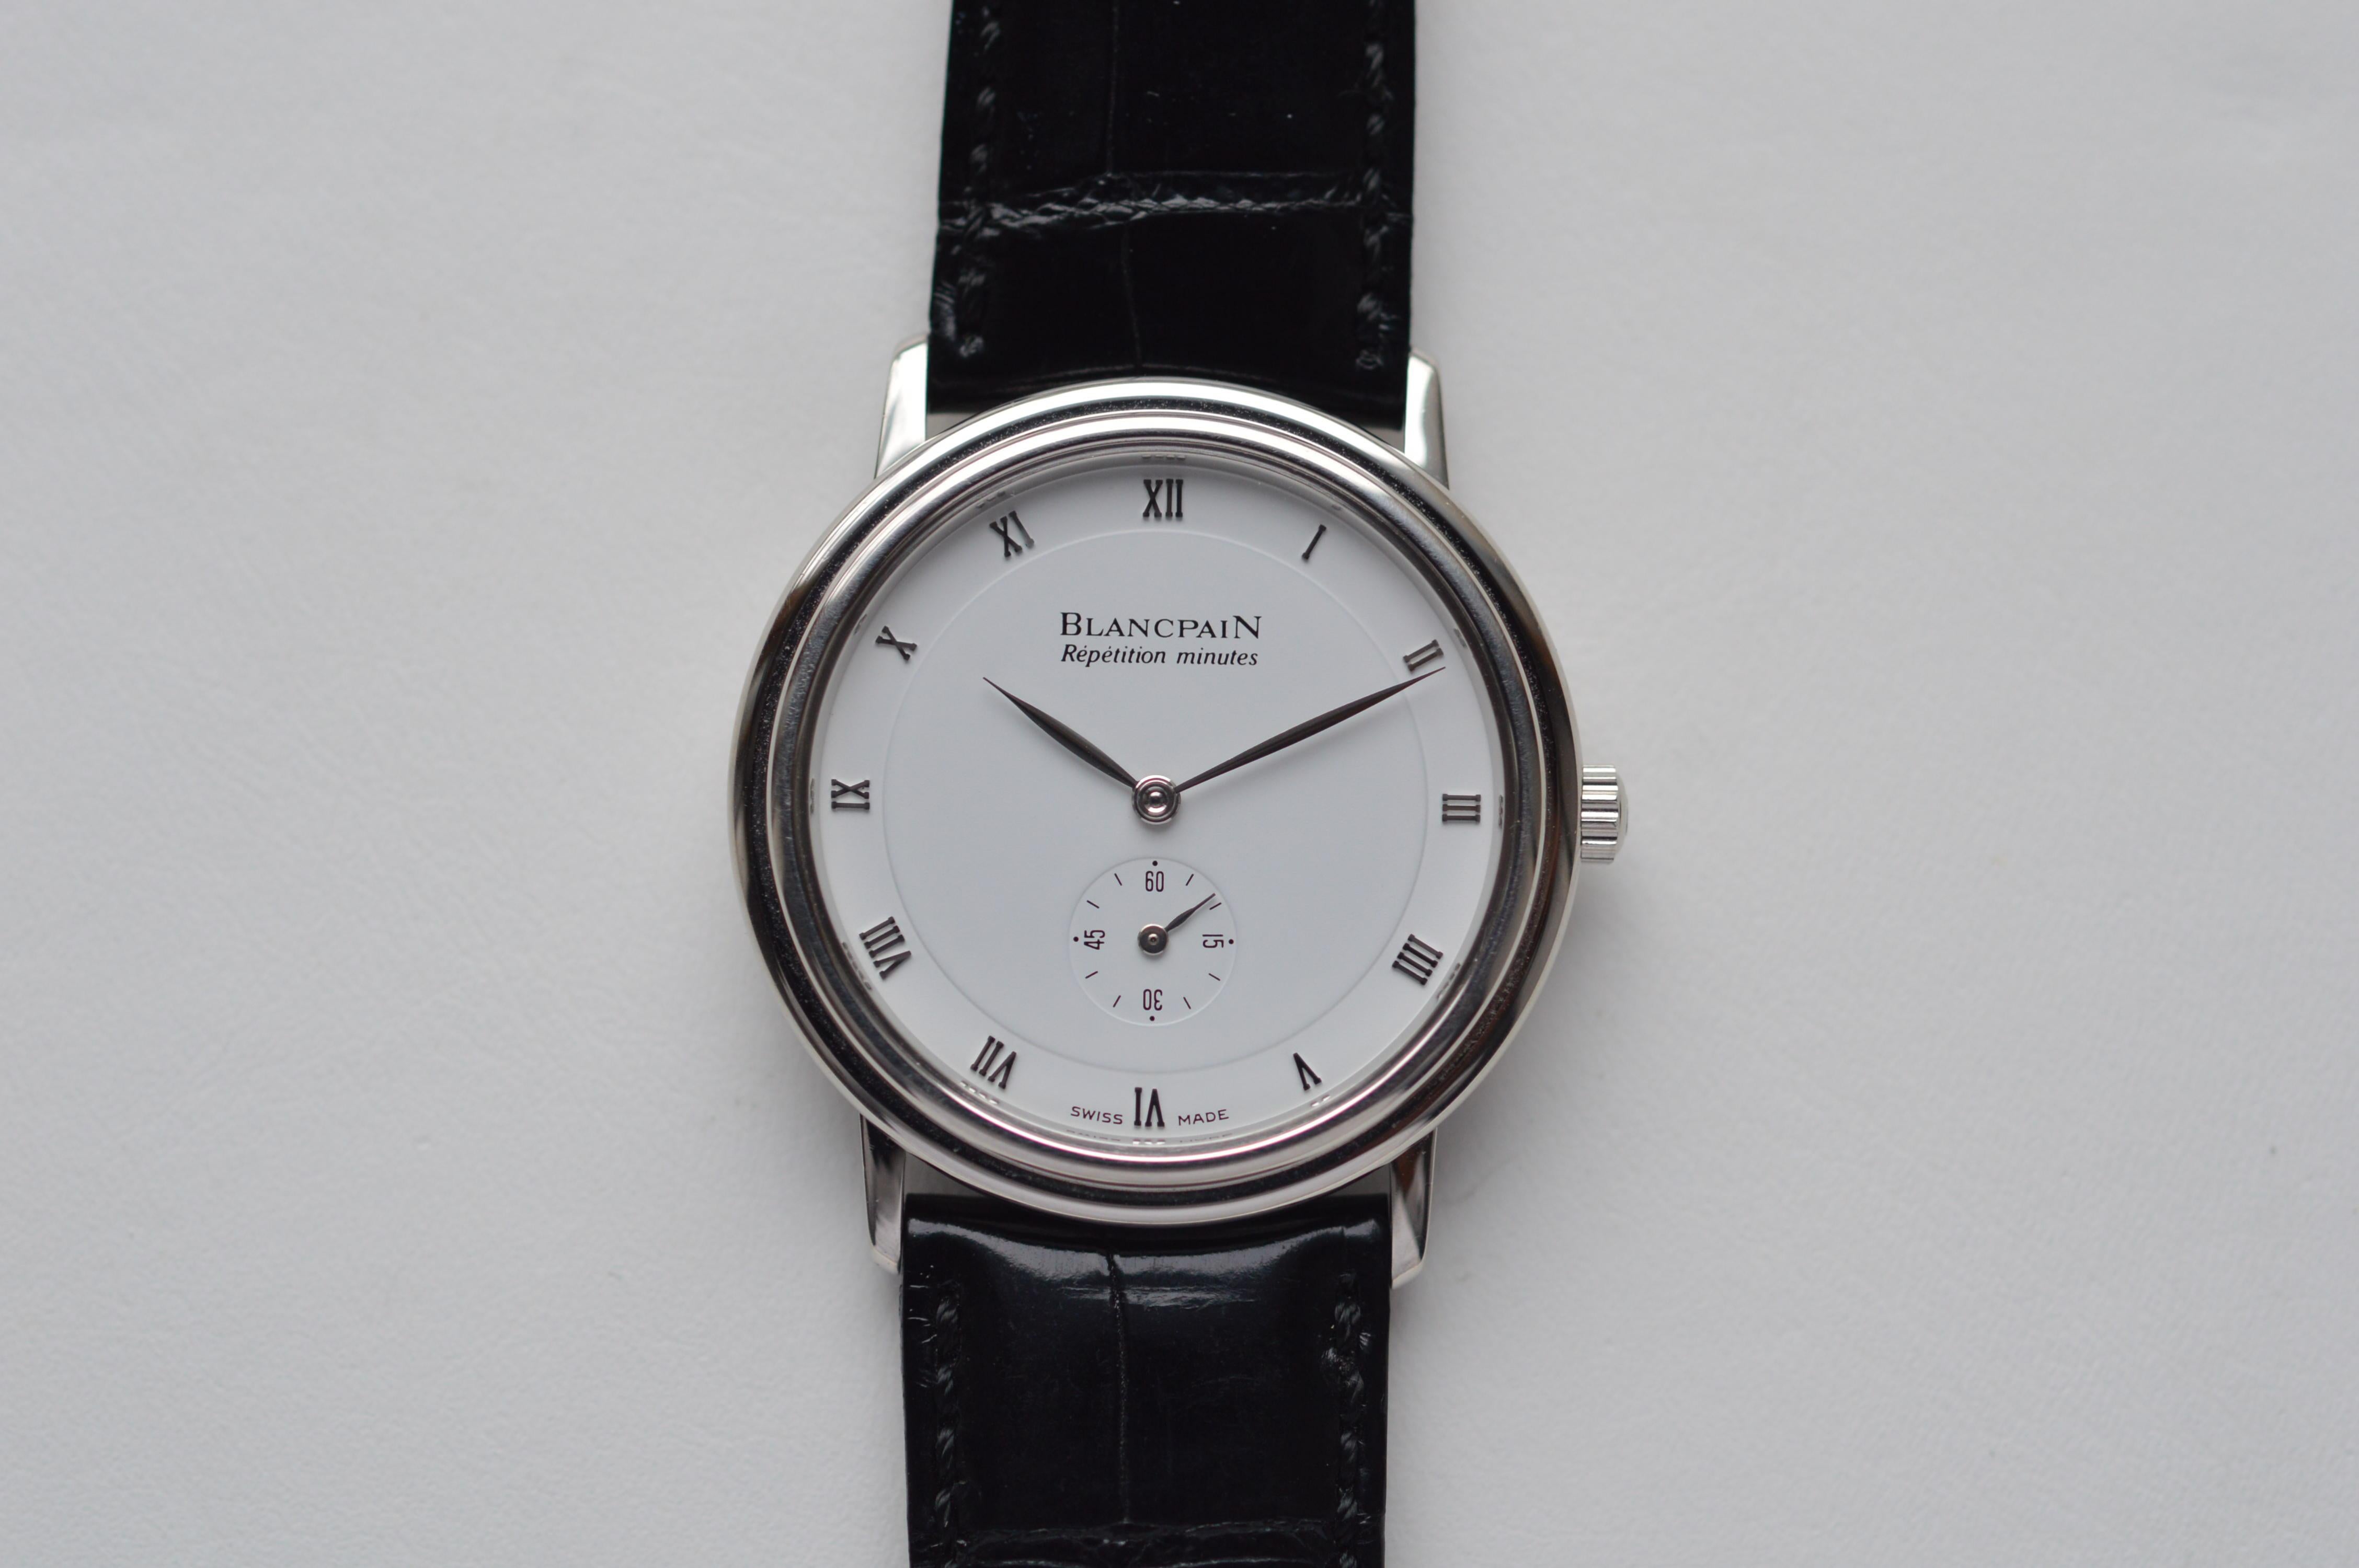 Blancpain Villeret Repetition Minutes in Platinum
Reference n° 0033-3427-55A
33mm Size
Limited Edition No°17
Very rare model in this condition
Mechanical Movement
950 Platinum Case & Buckle
Minute Repeater
Black Leather Strap with a Platinum